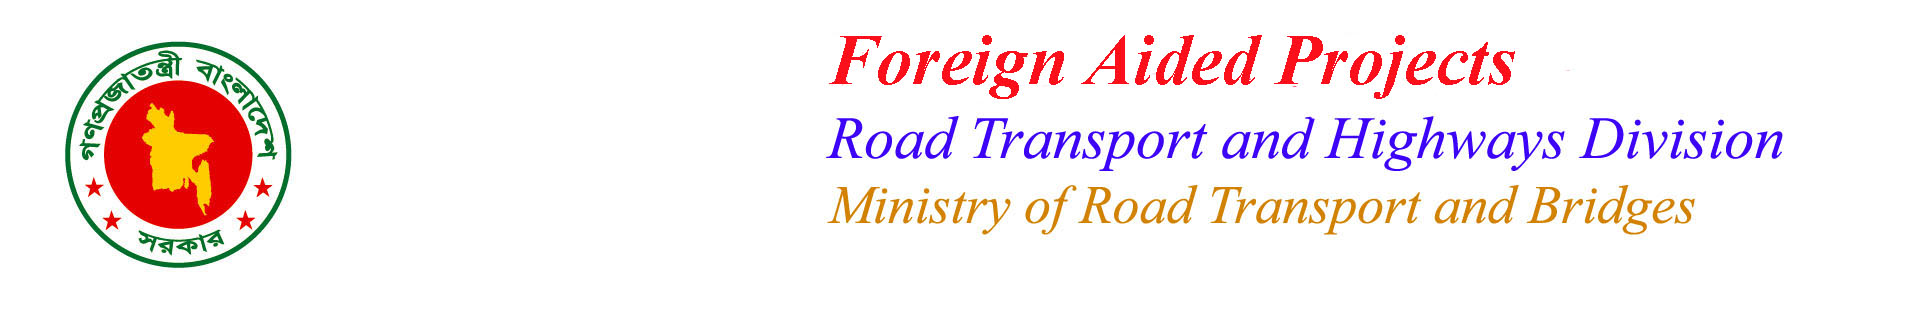 Road Transport and Highways Division